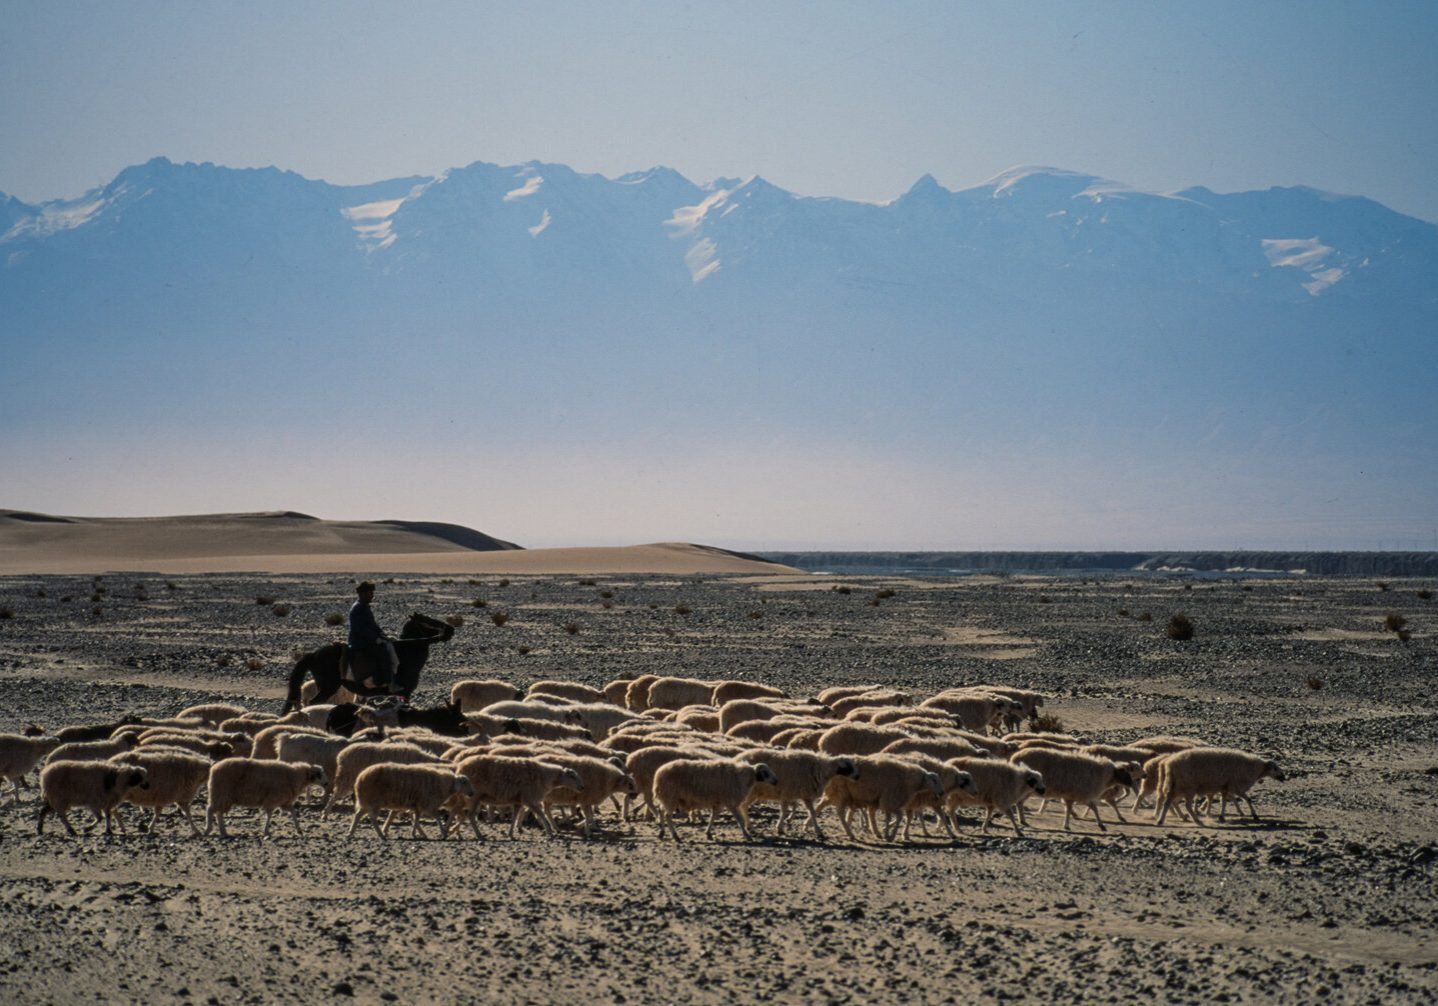 Along the Southern Silk Road a shepherd tends his flock. The Kun Lun Mountains are in the distance with Tibet on the other side of them.